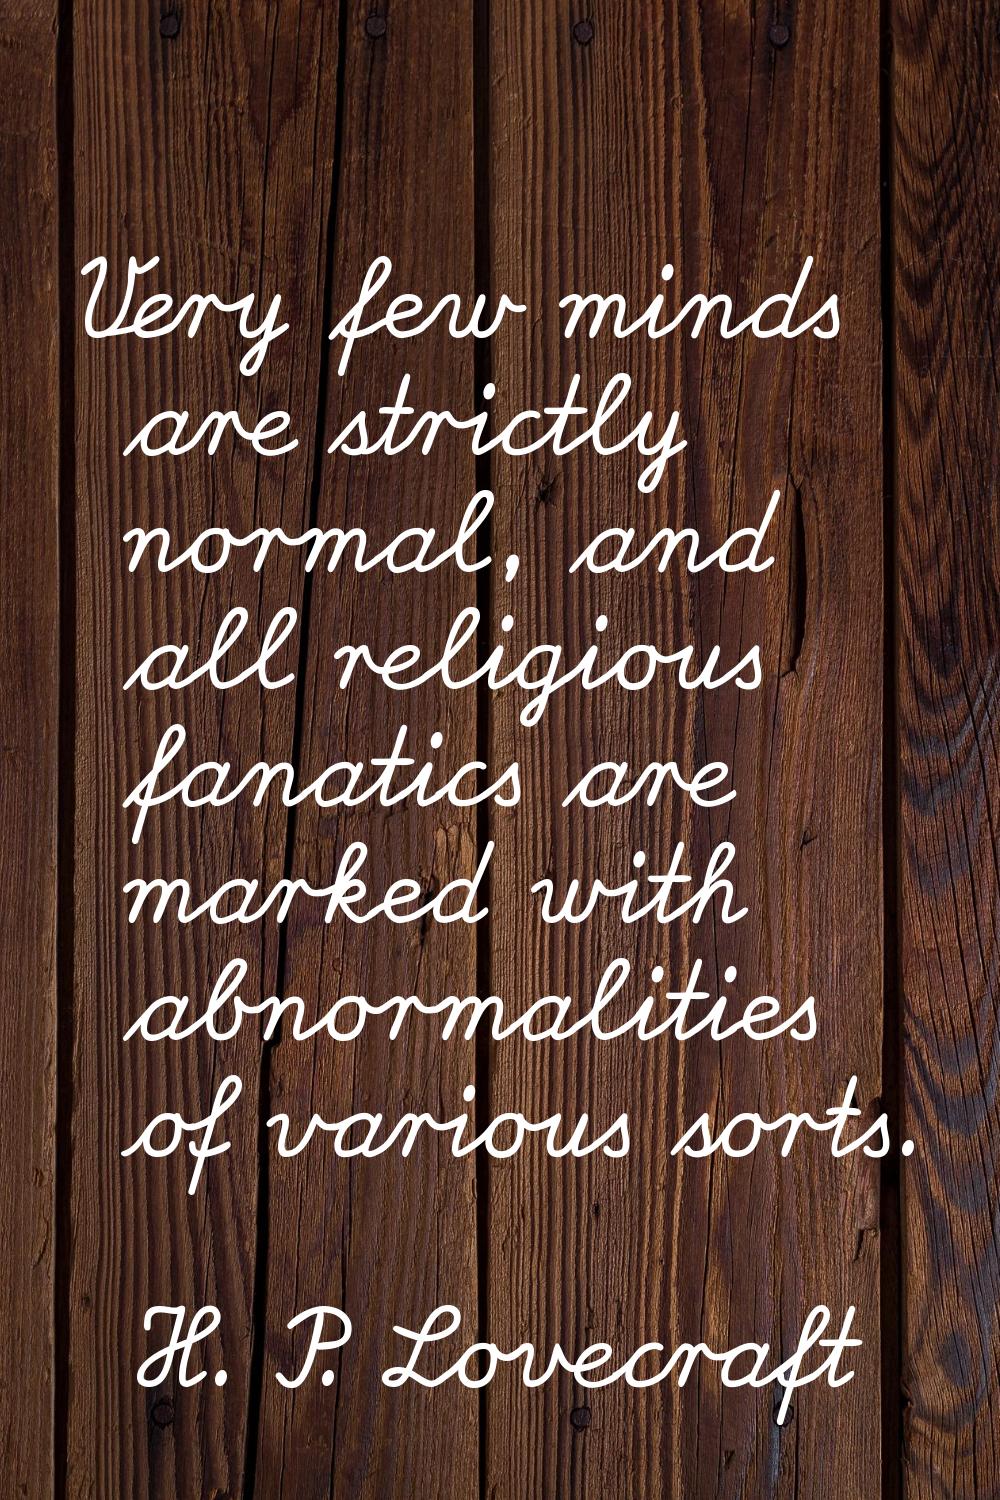 Very few minds are strictly normal, and all religious fanatics are marked with abnormalities of var